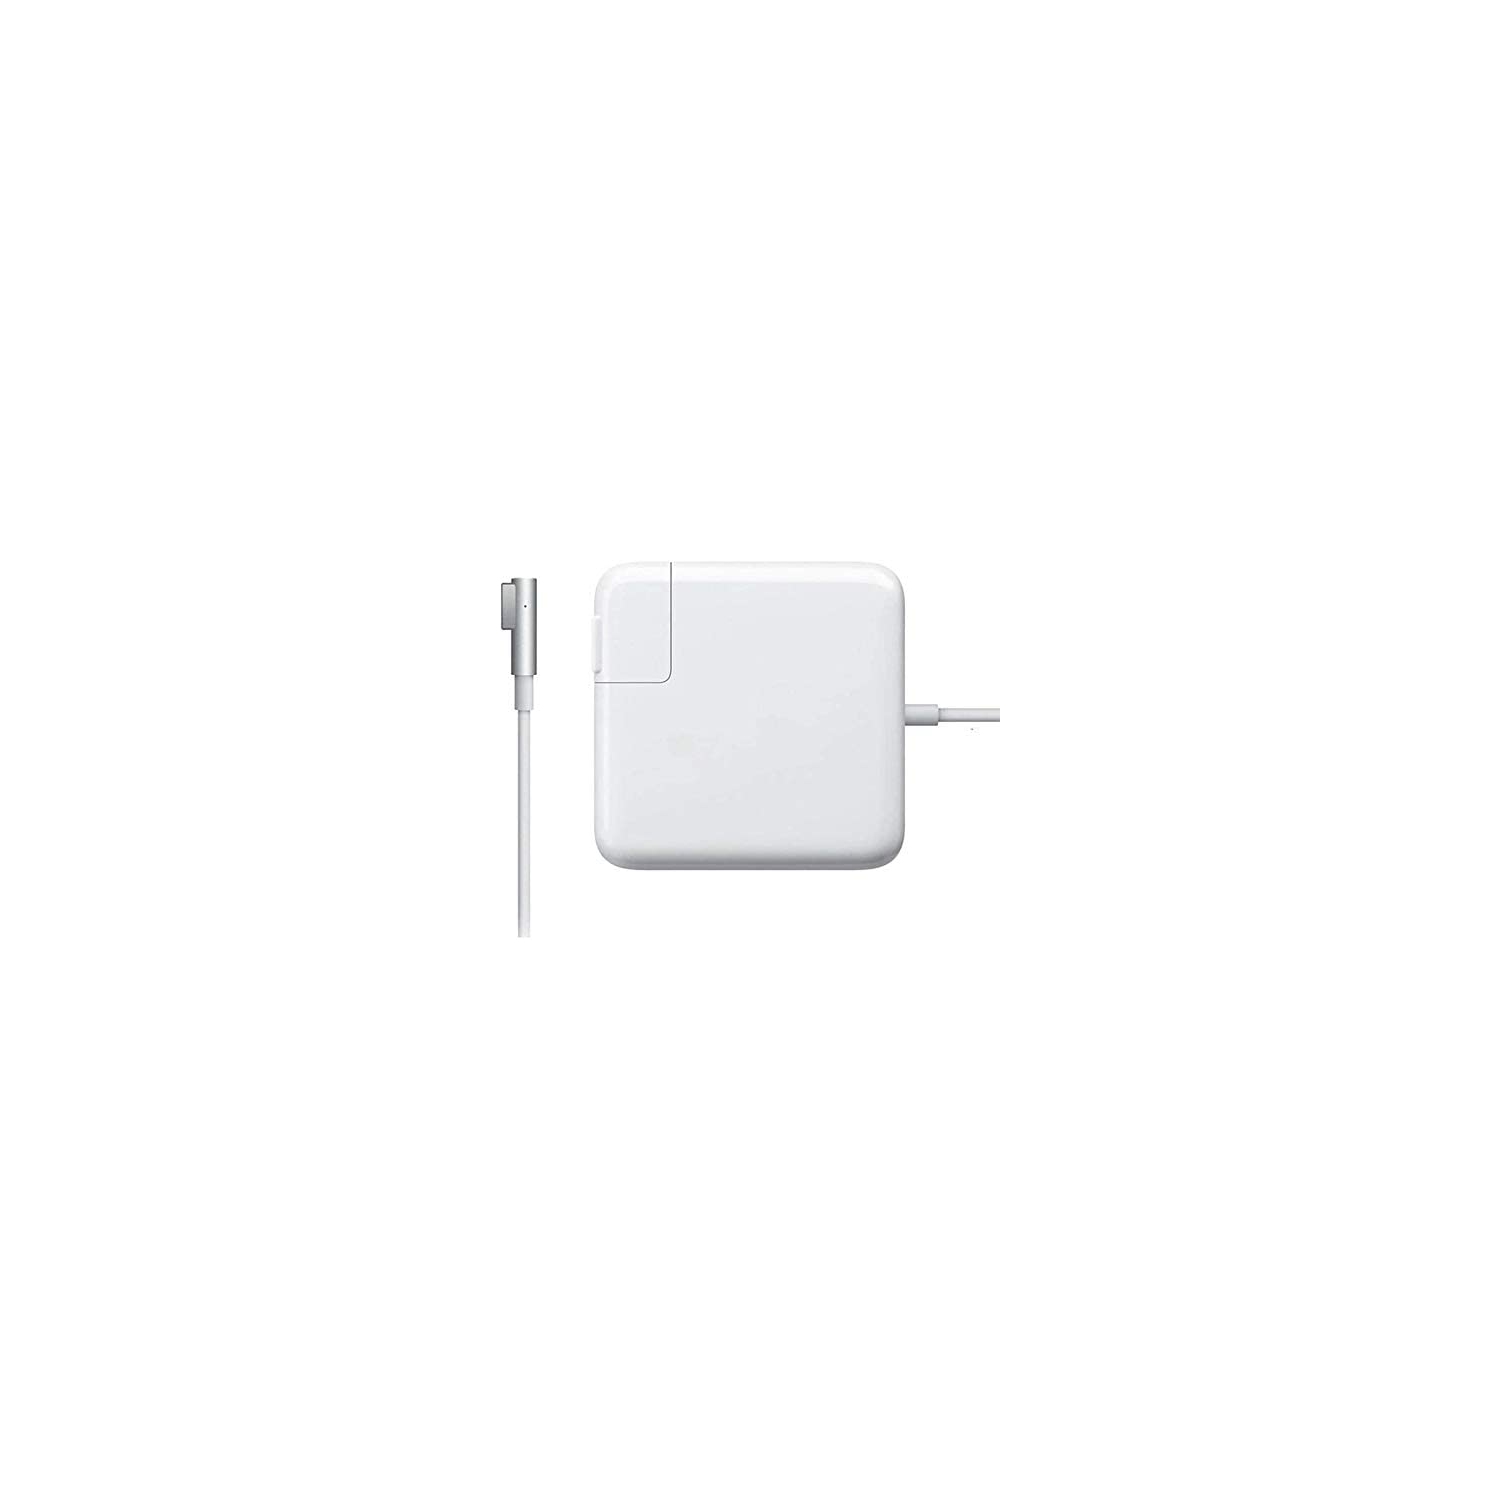 WINGOMART MacBook Pro Charger 60W MagSafe 1 L-Tip Power Adapter for Apple MagSafe Macbook A1278 A1344 A1181 A1184